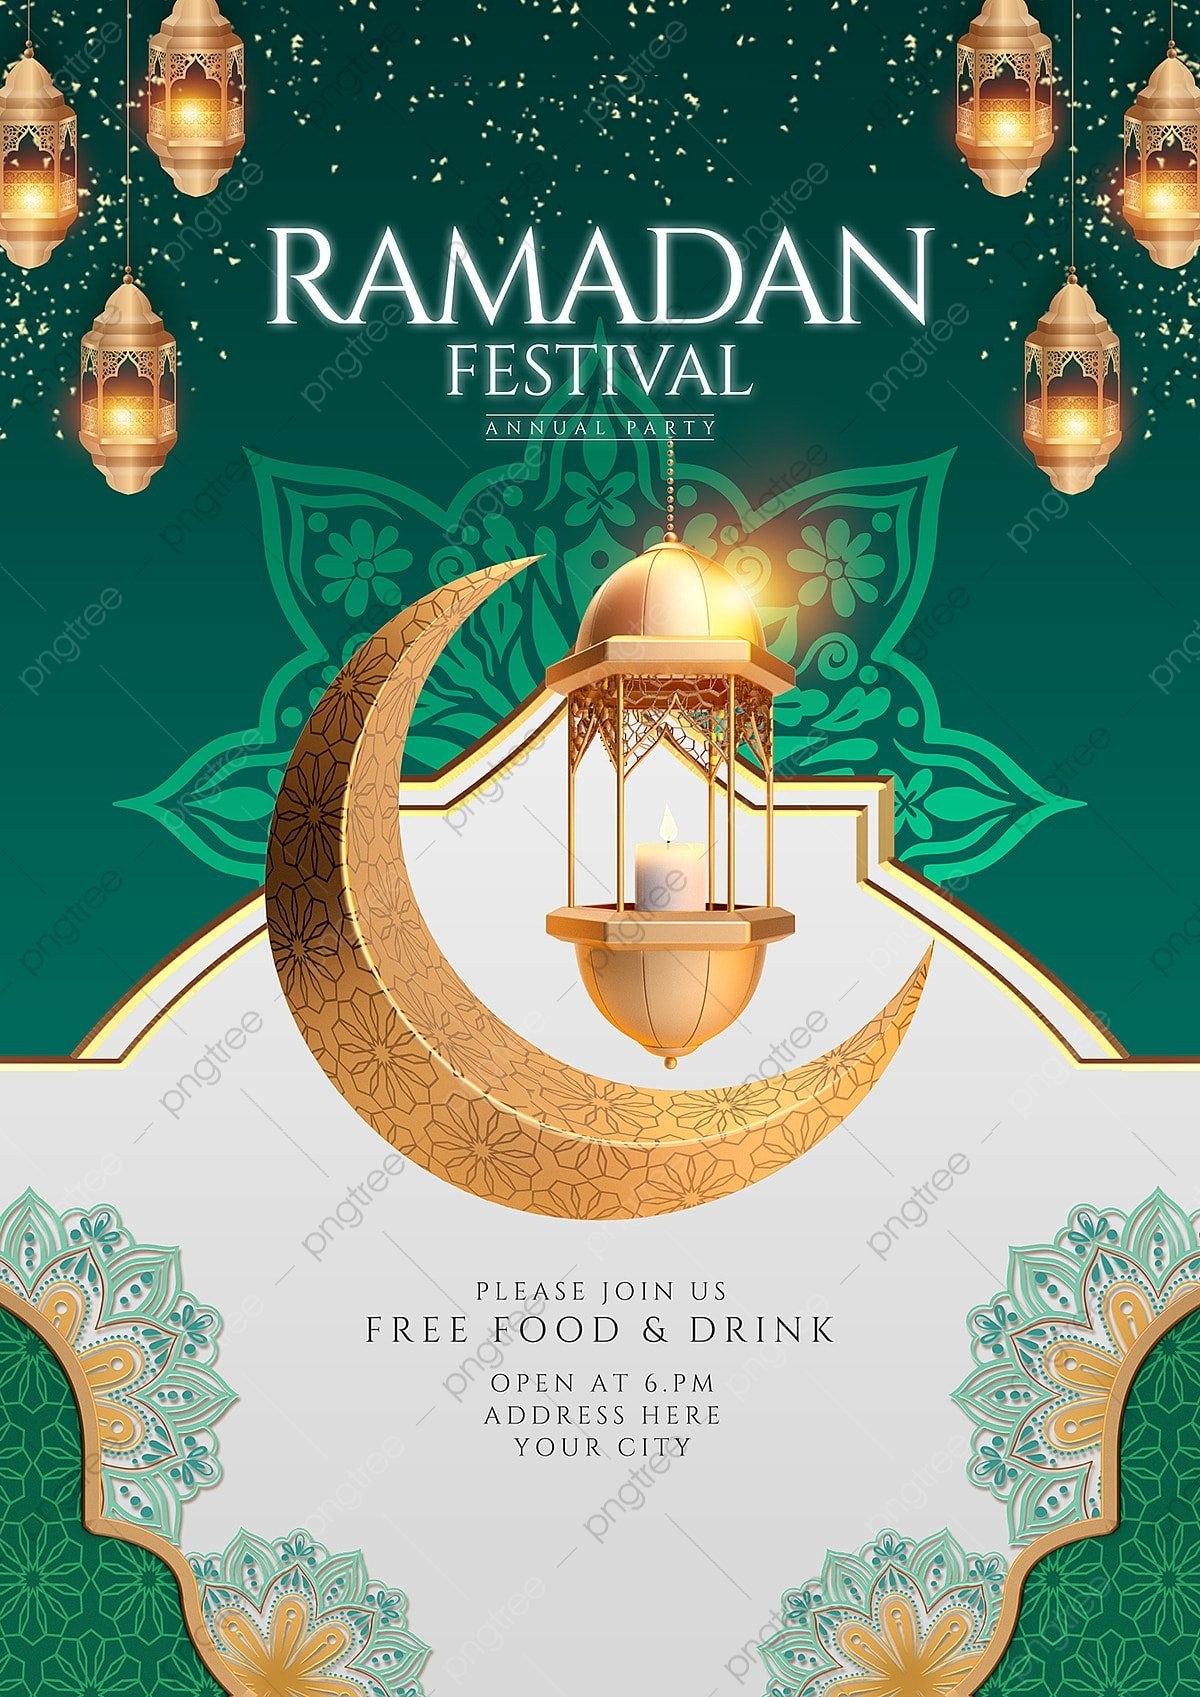 pngtree-golden-three-dimensional-muslim-eid-al-fitr-religious-festival-poster-png-image_7445919.png